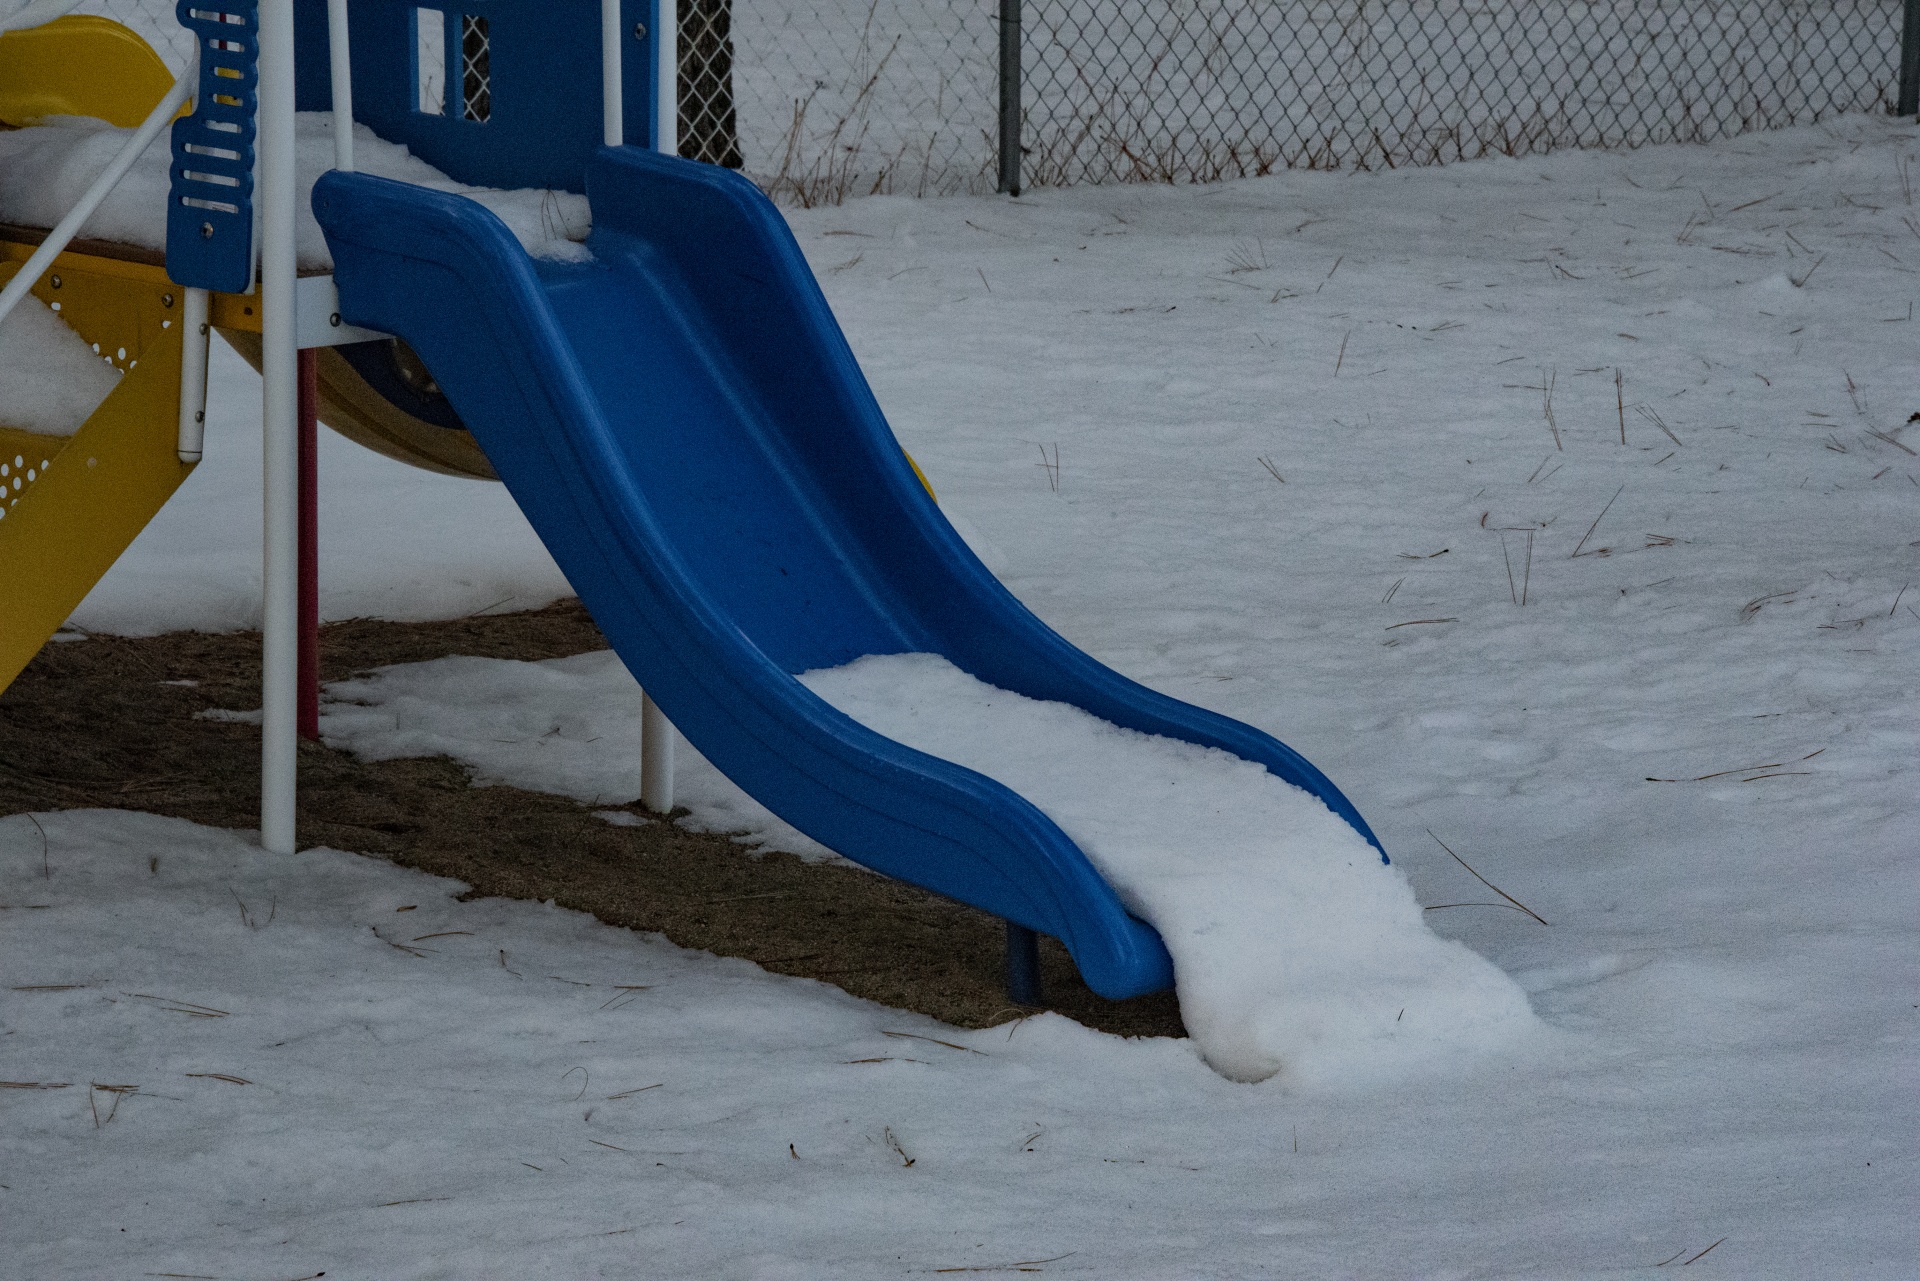 Playground slide in bright blue is covered in white snow